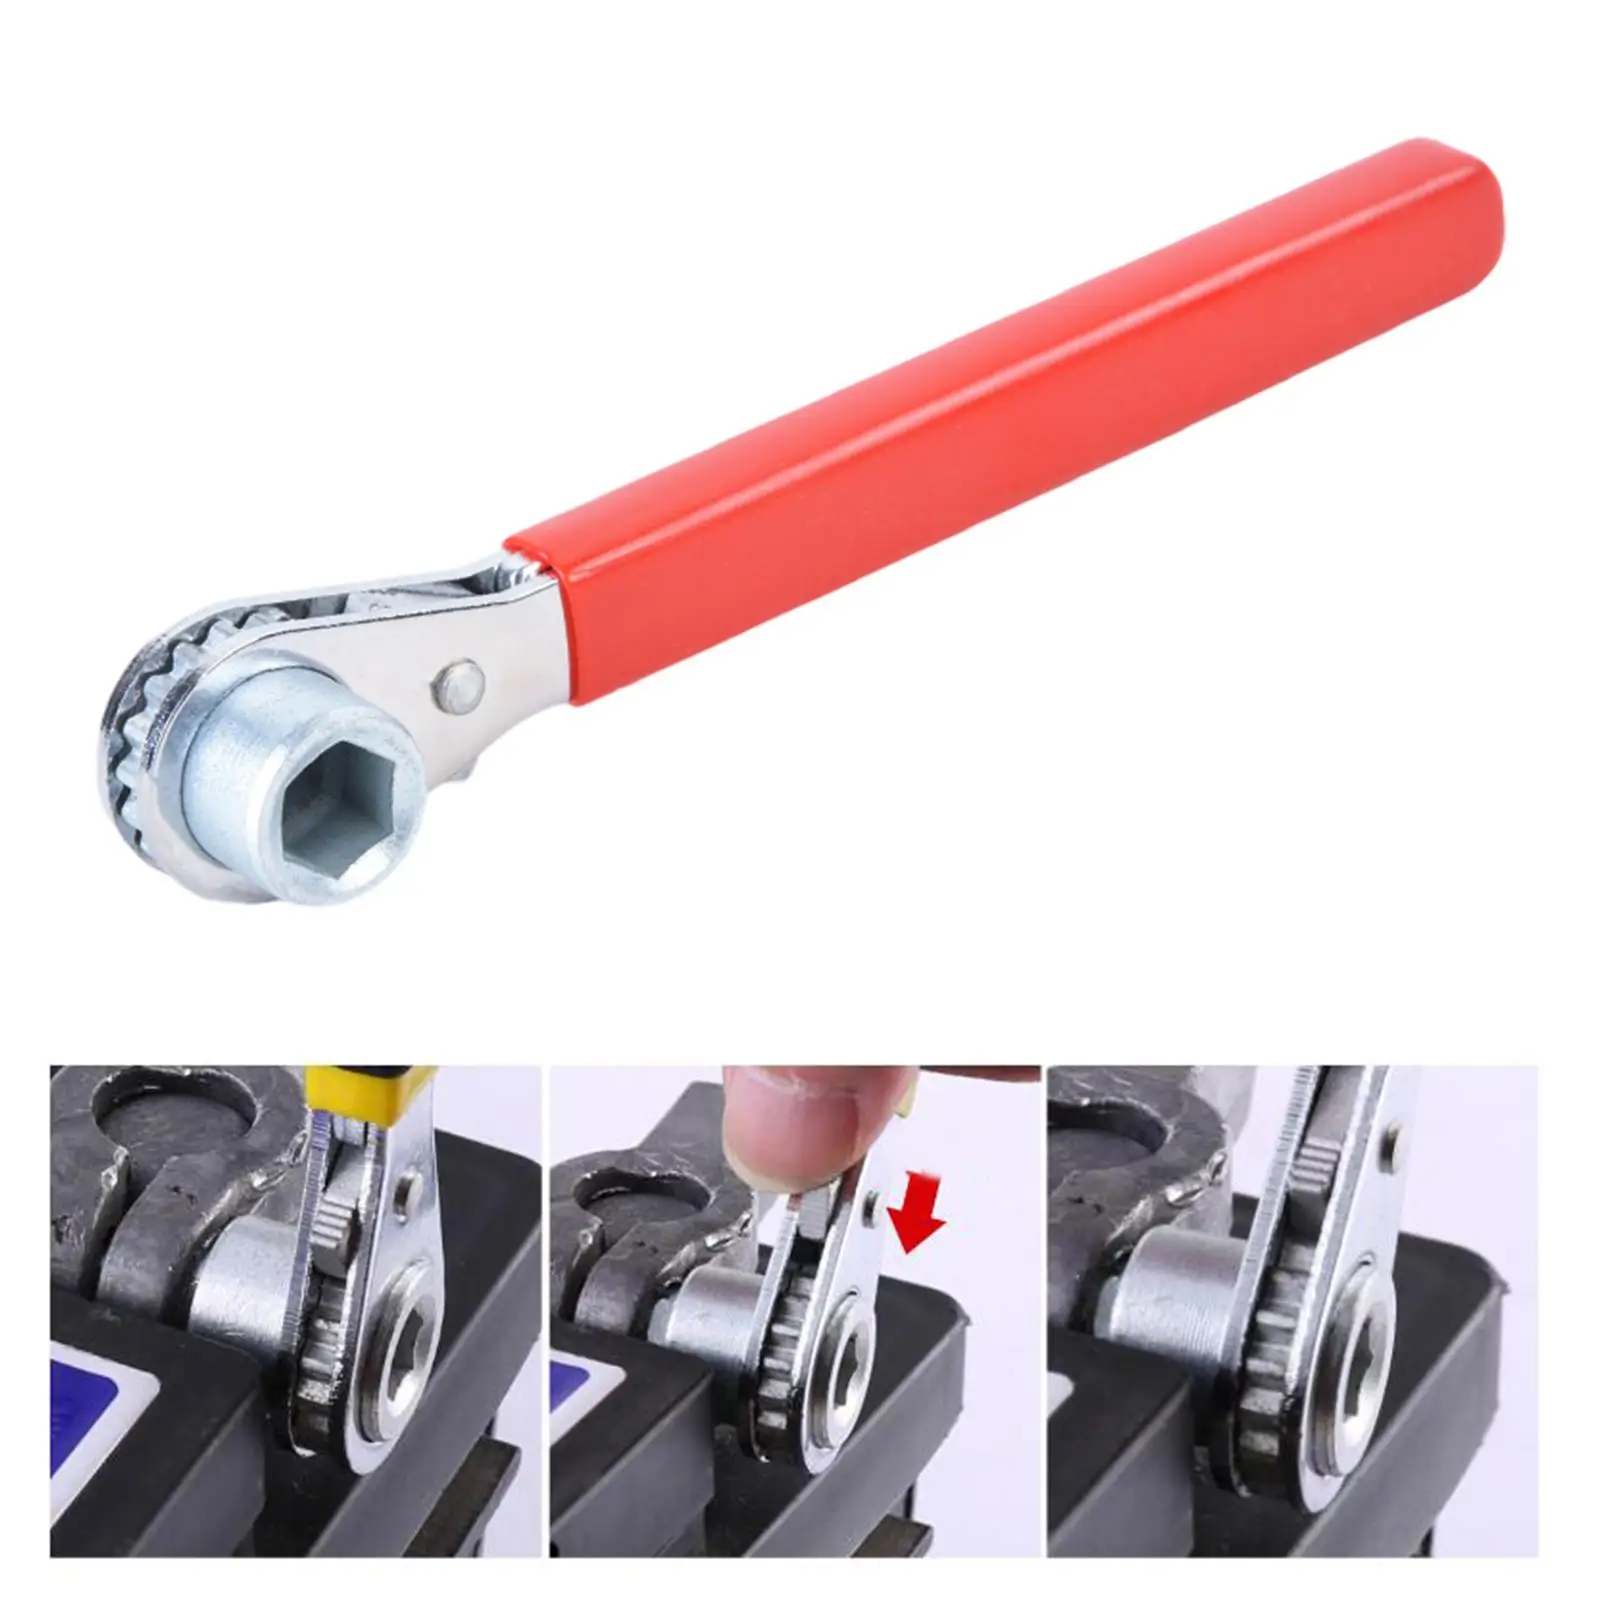 Ratchet Wrench 5/16in 0.4in 10mm Multipurpose Easy to Carry Repair Wrench for Tightening and Loosening Practical Ratchet Spanner